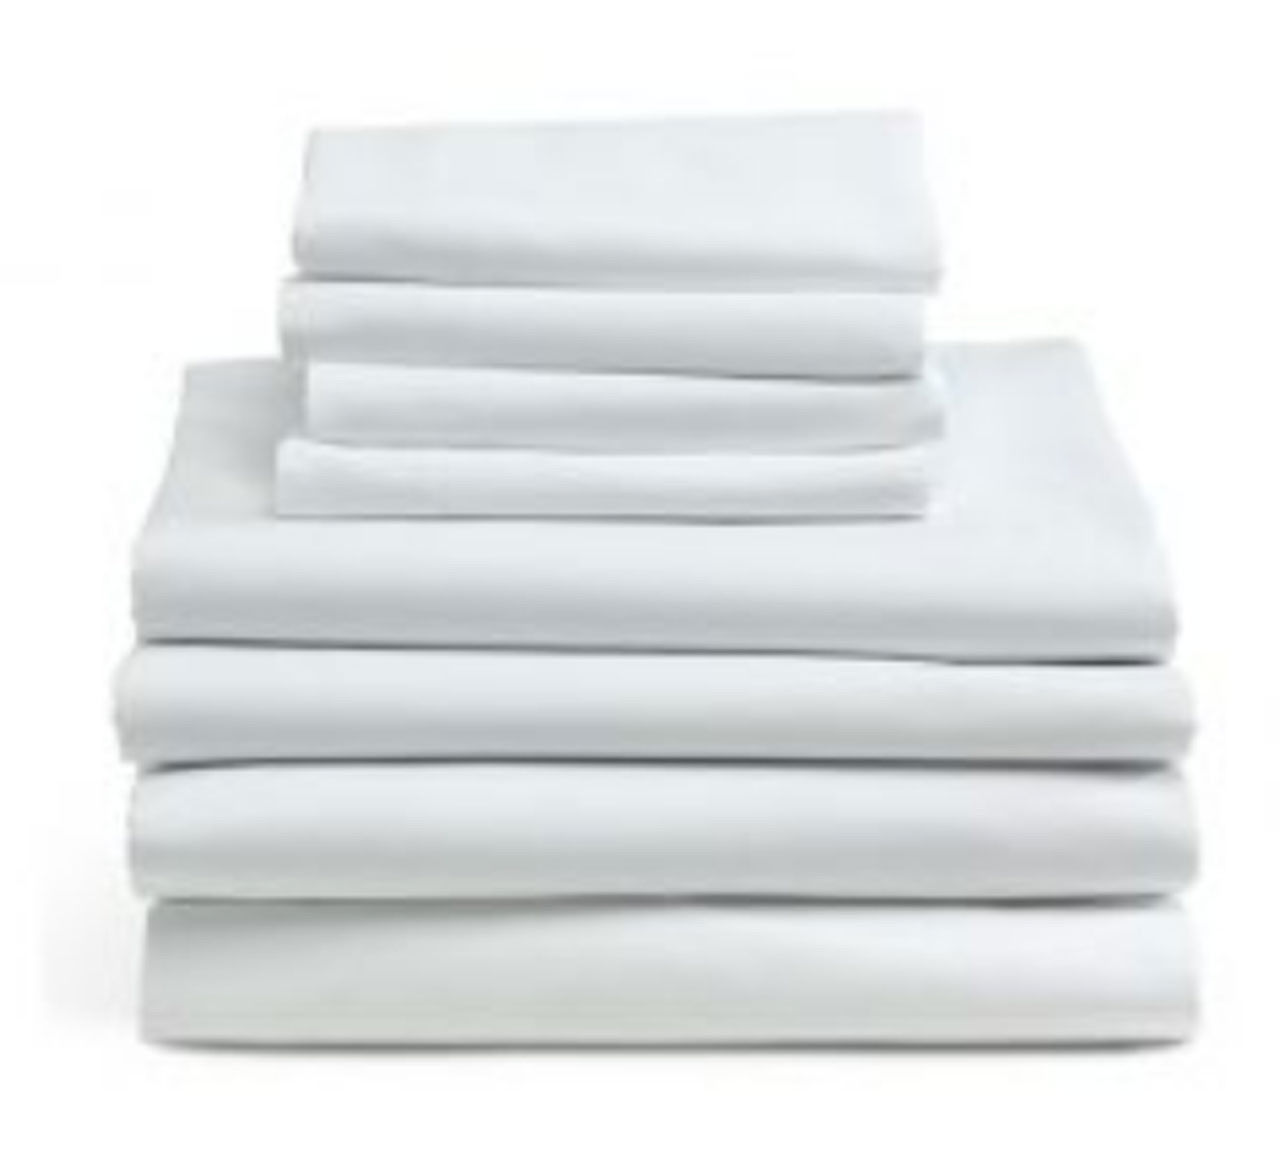 From where does royal star wholesale ship the Royal Star T-180 Hospitality Bed Sheets?